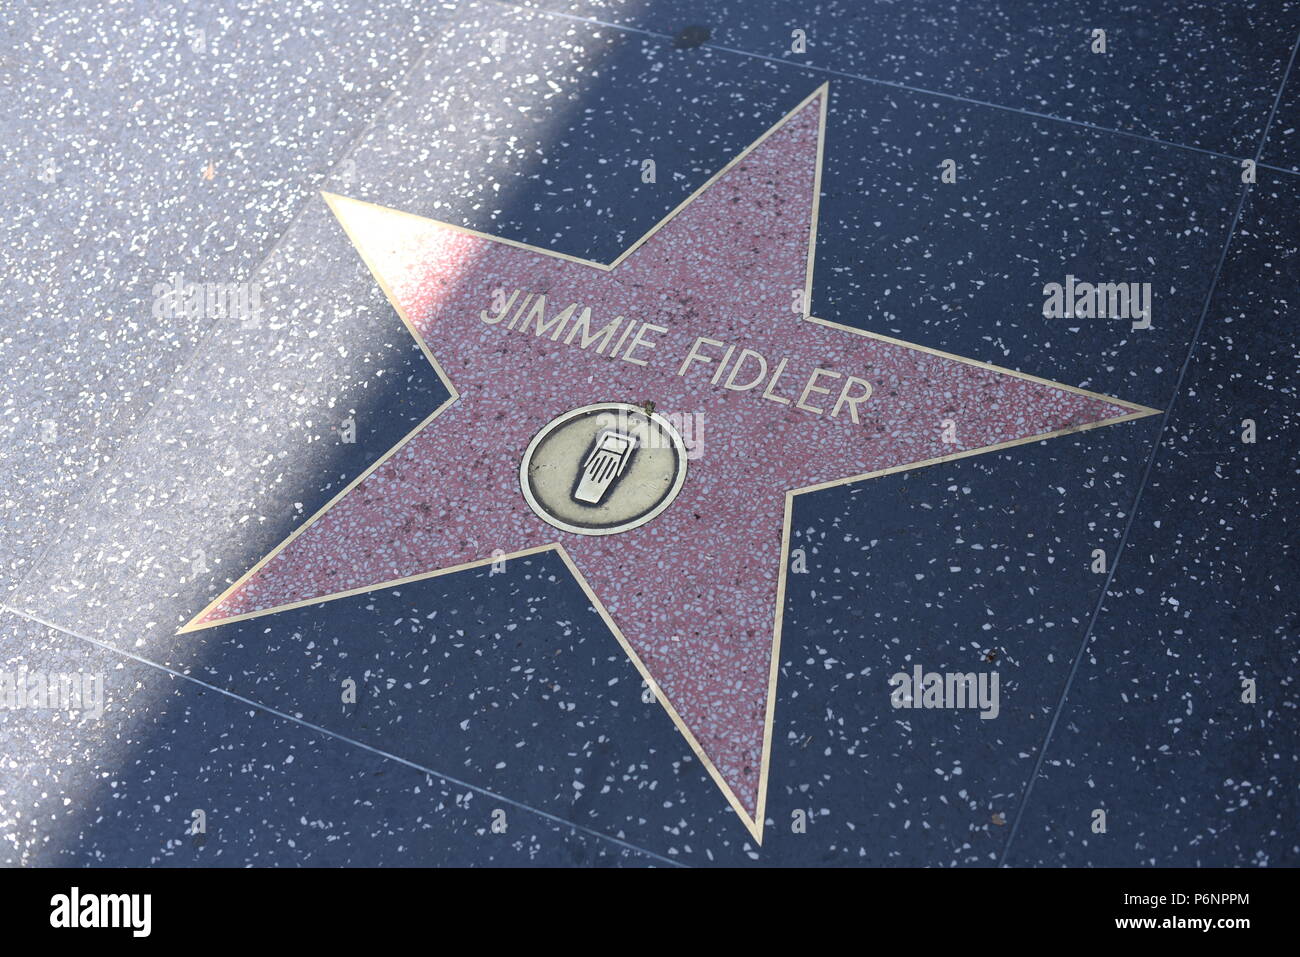 HOLLYWOOD, CA - June 29: Jimmie Fidler star on the Hollywood Walk of Fame in Hollywood, California on June 29, 2018. Stock Photo